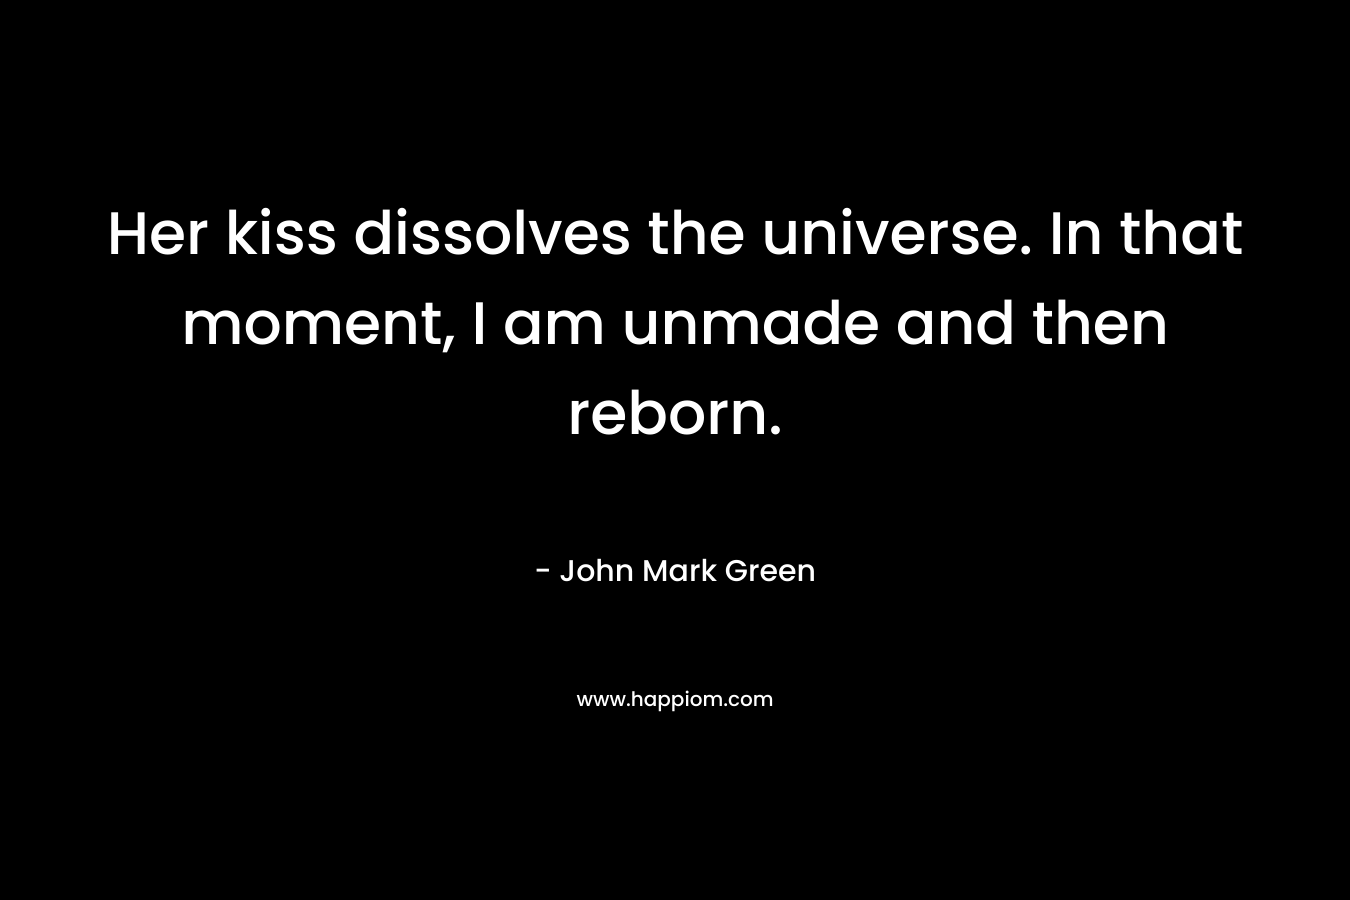 Her kiss dissolves the universe. In that moment, I am unmade and then reborn. – John Mark Green